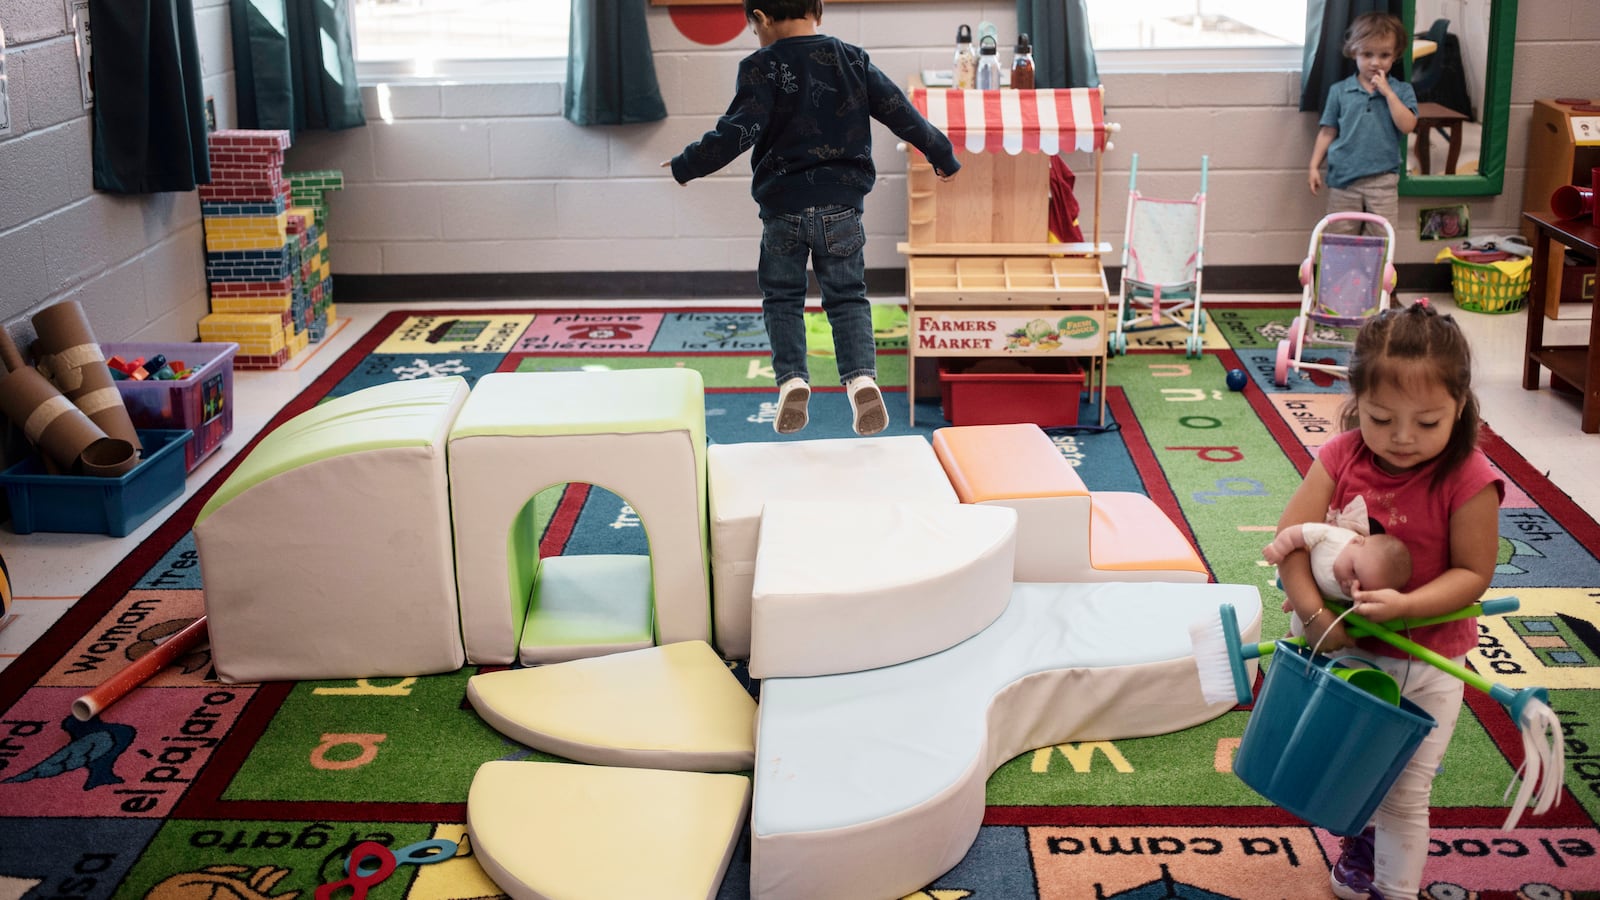 Preschool children are seen playing in a classroom during a recent morning session at Su Casa Ministries in Memphis.